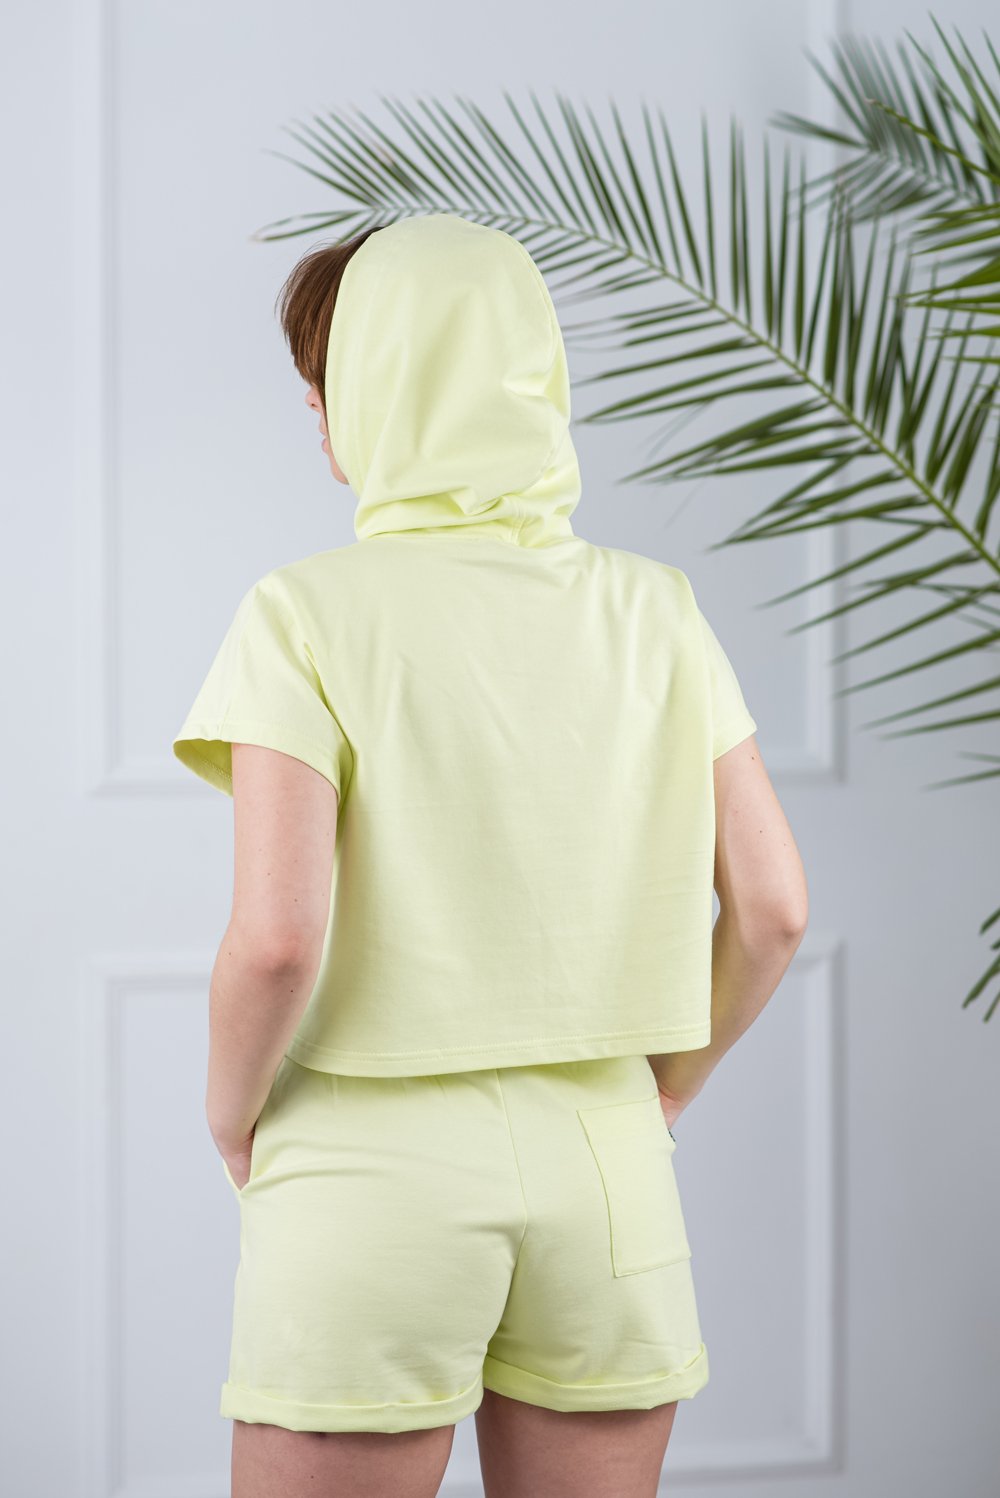 Summer suit shorts and hoodie in lime color